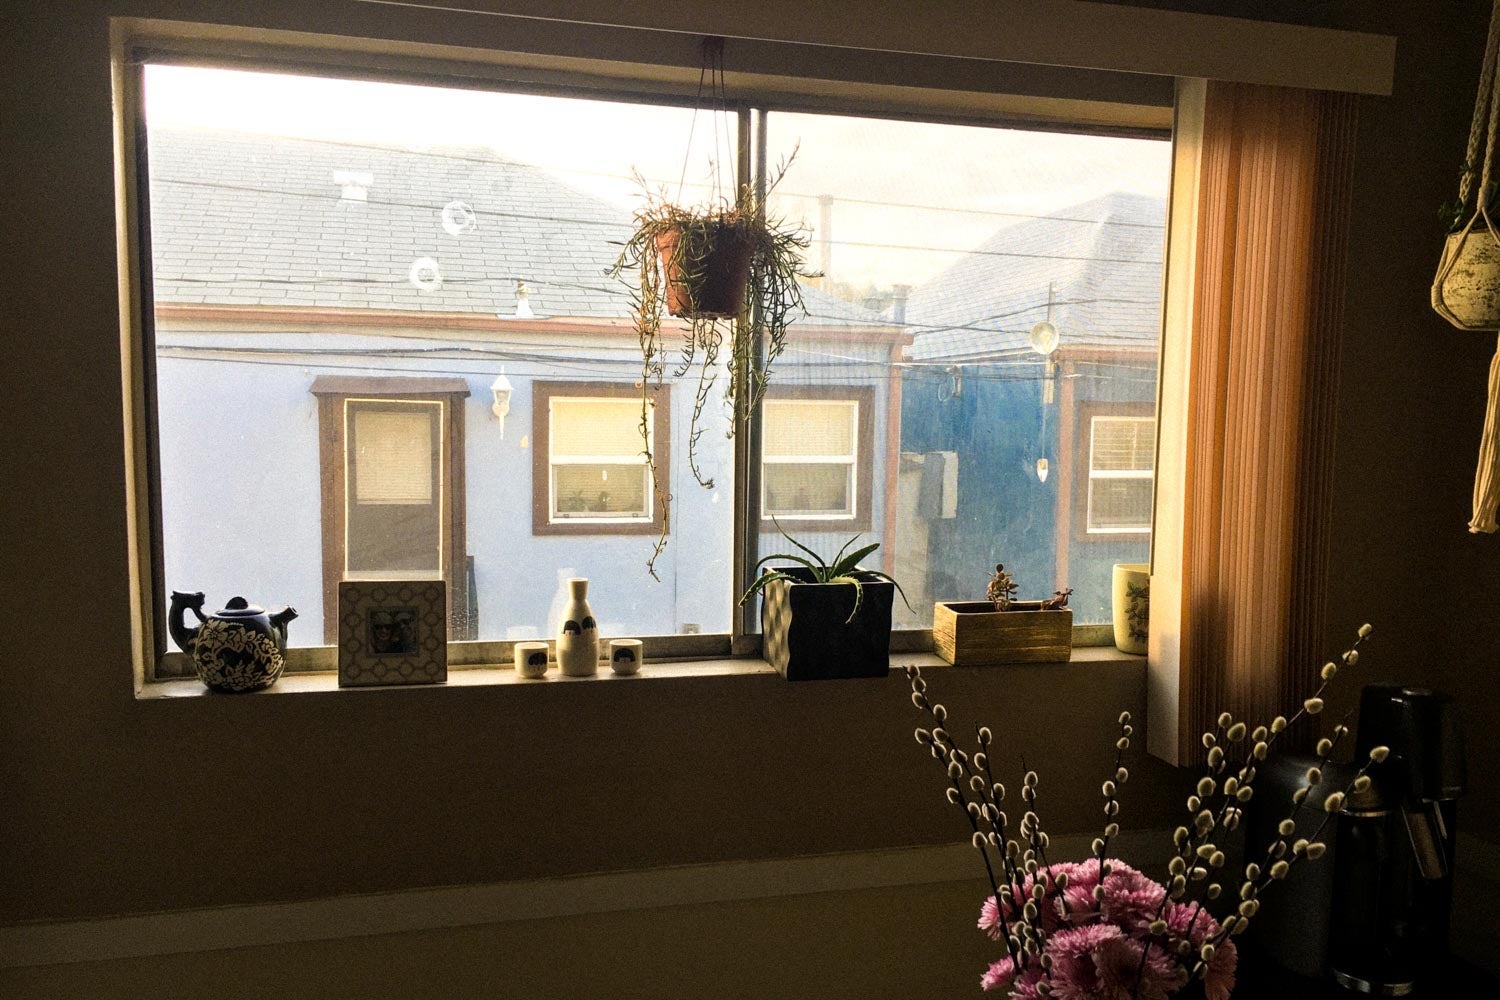 A window facing two blue homes brings sunlight onto a vase of flowers indoors.